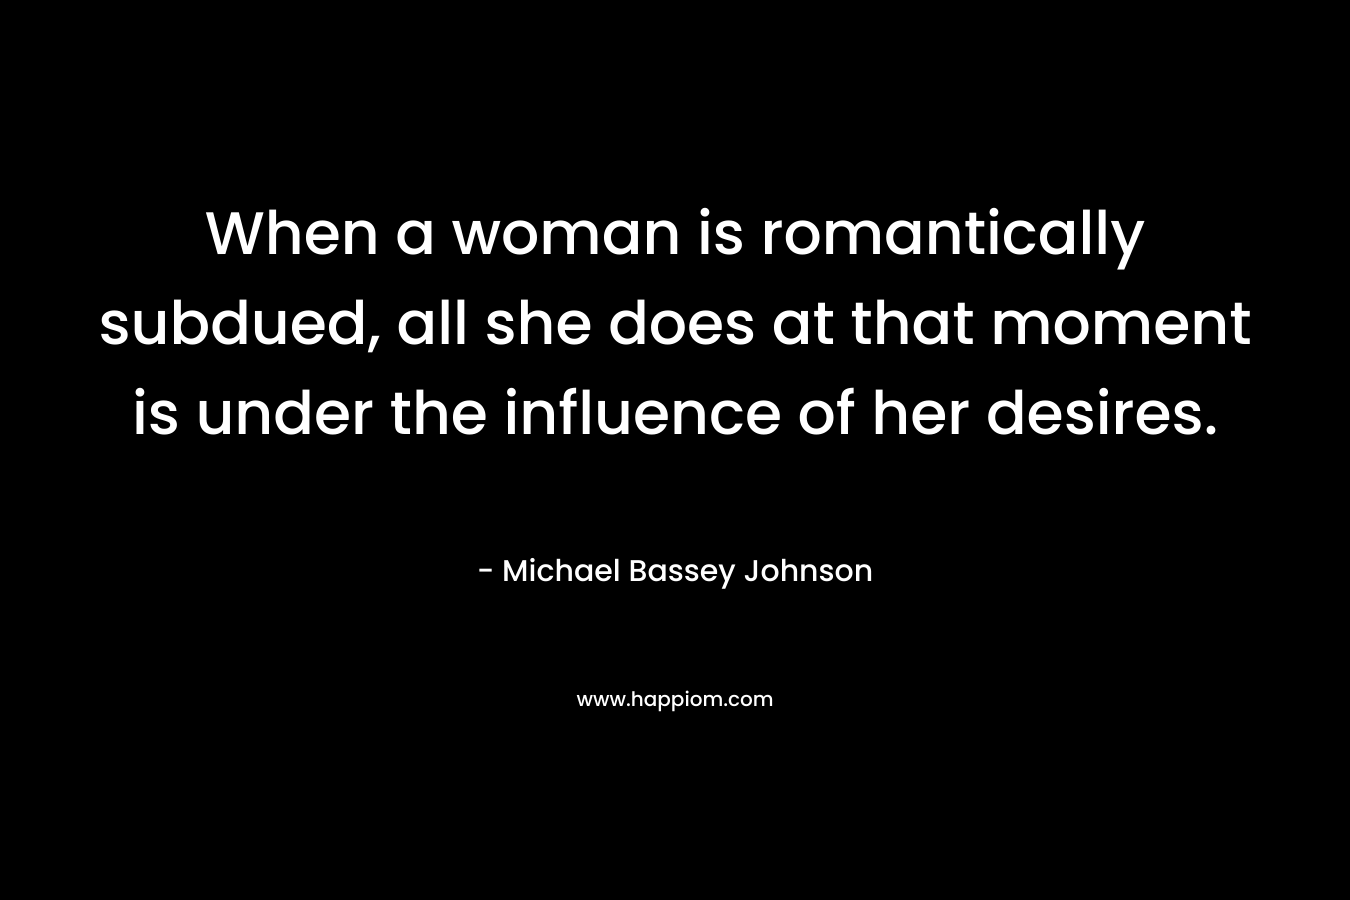 When a woman is romantically subdued, all she does at that moment is under the influence of her desires. – Michael Bassey Johnson